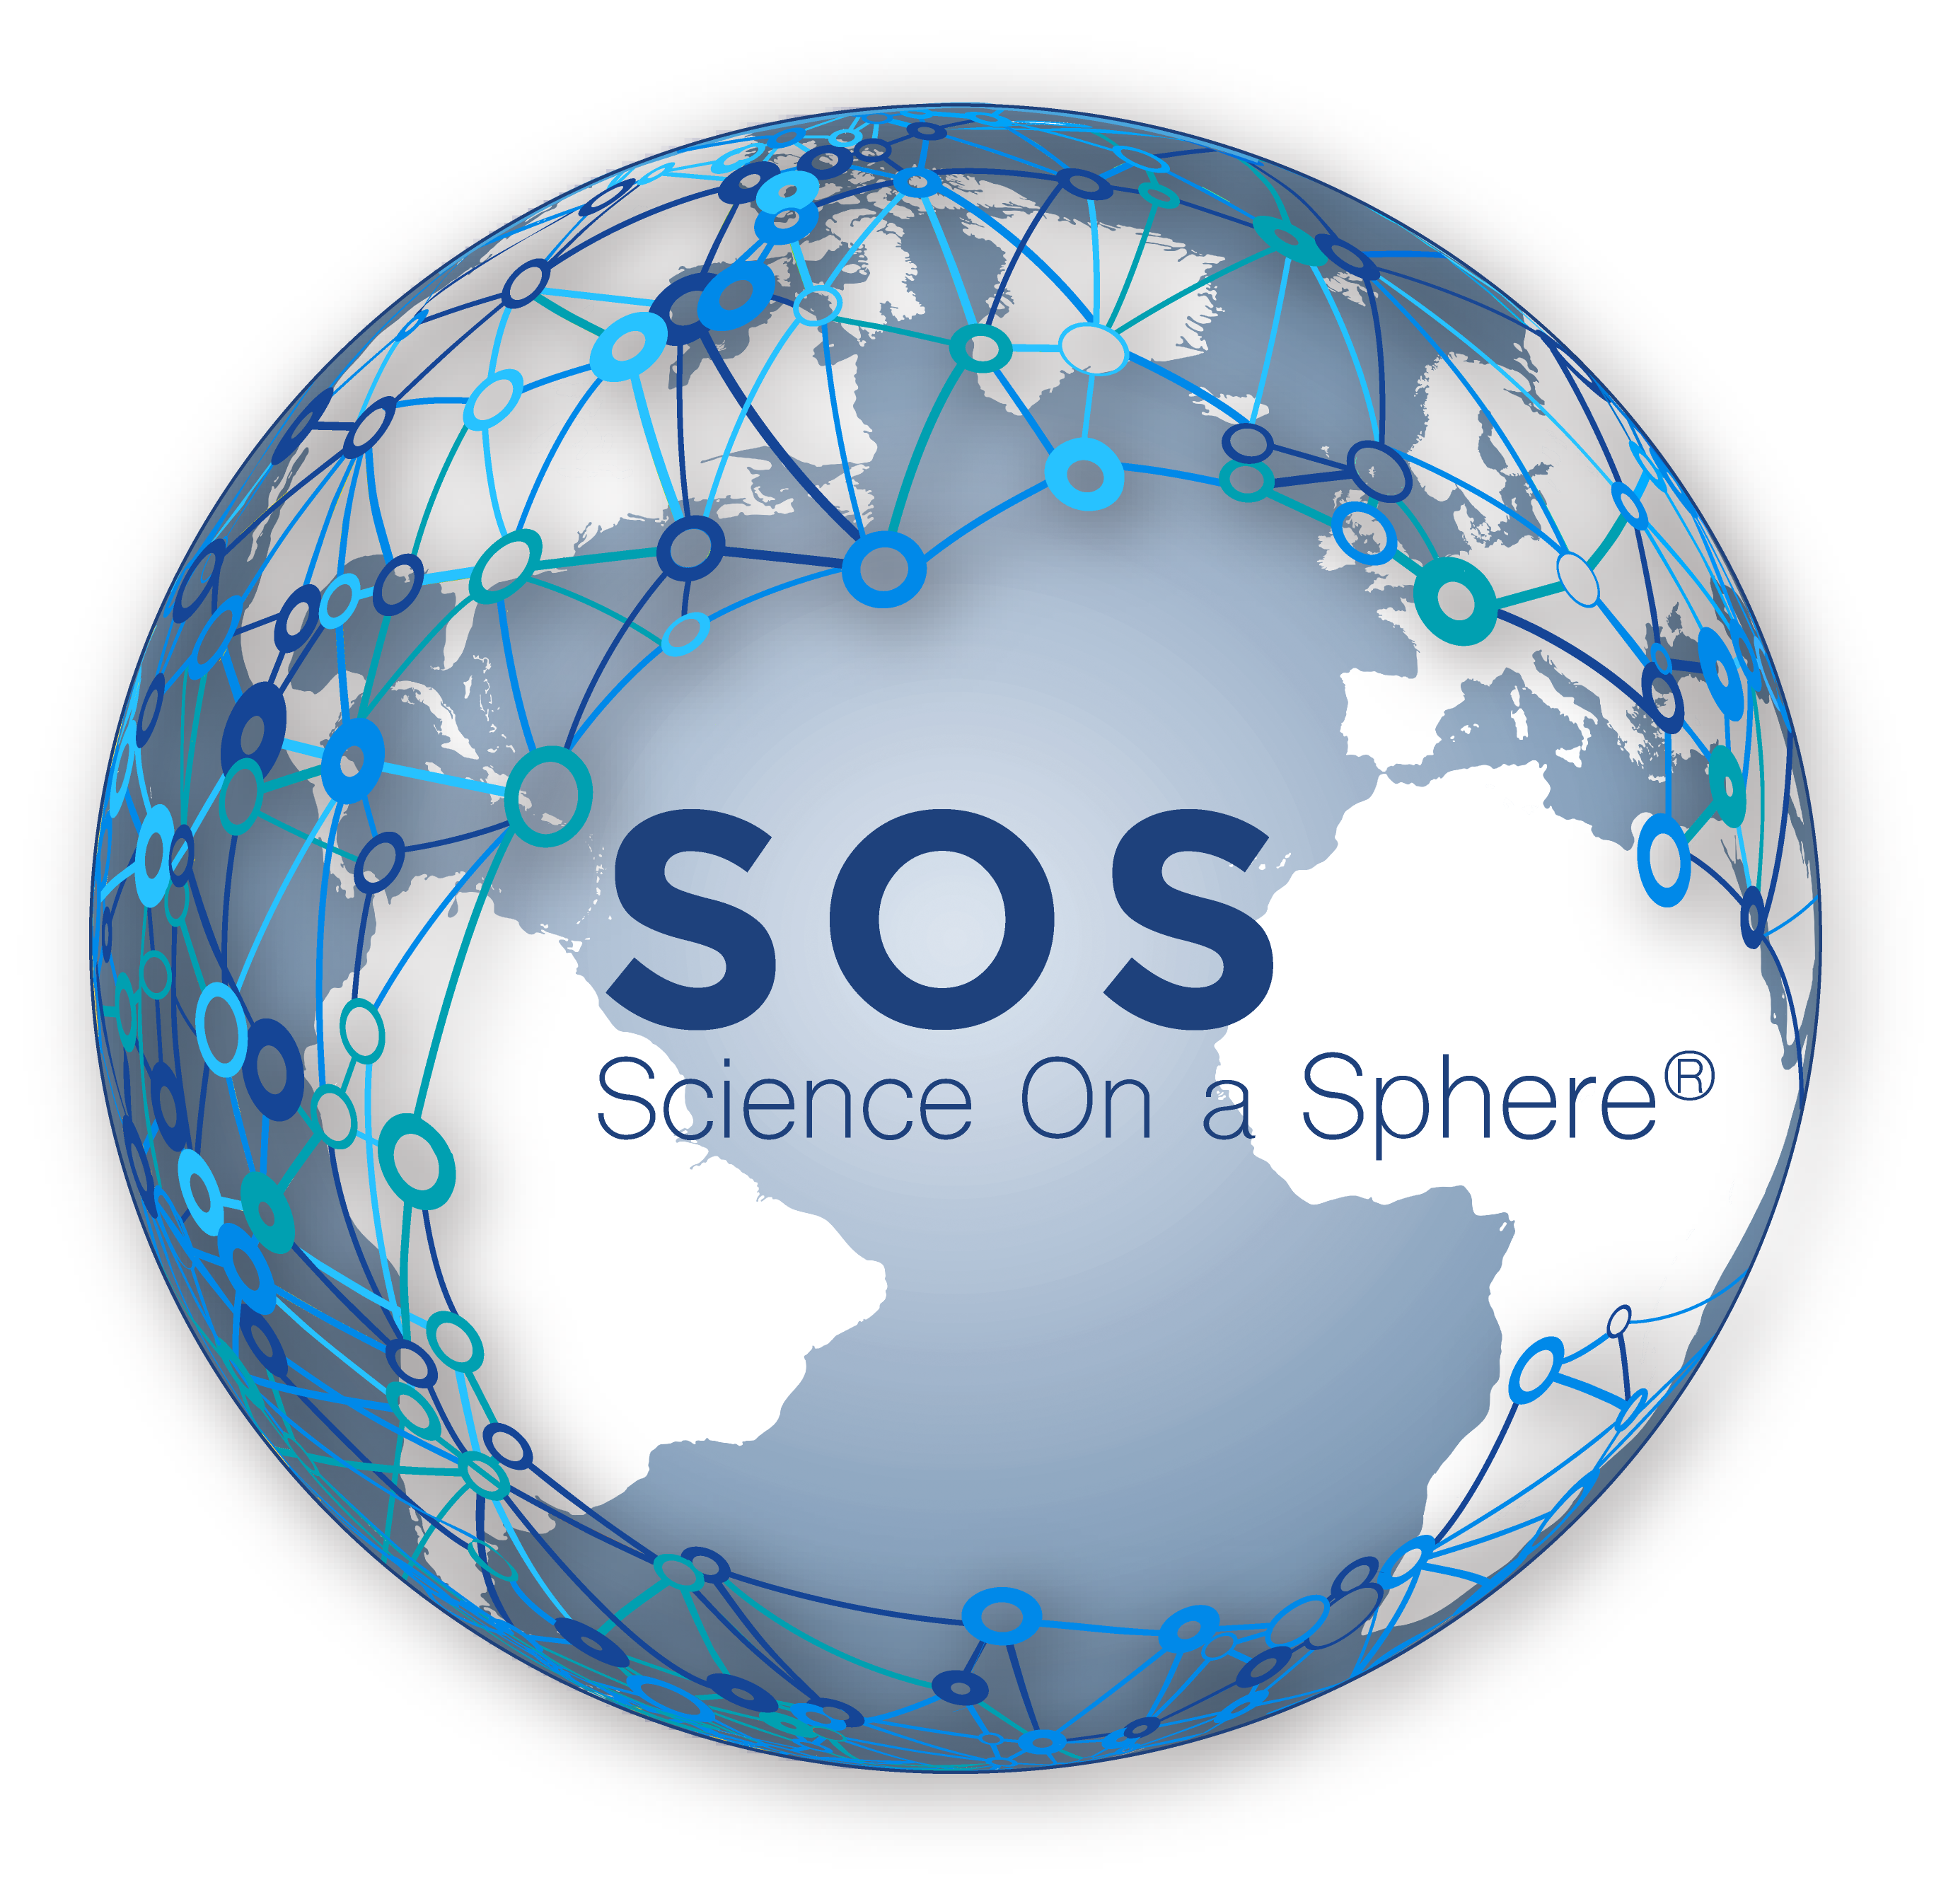 Science On a Sphere logo